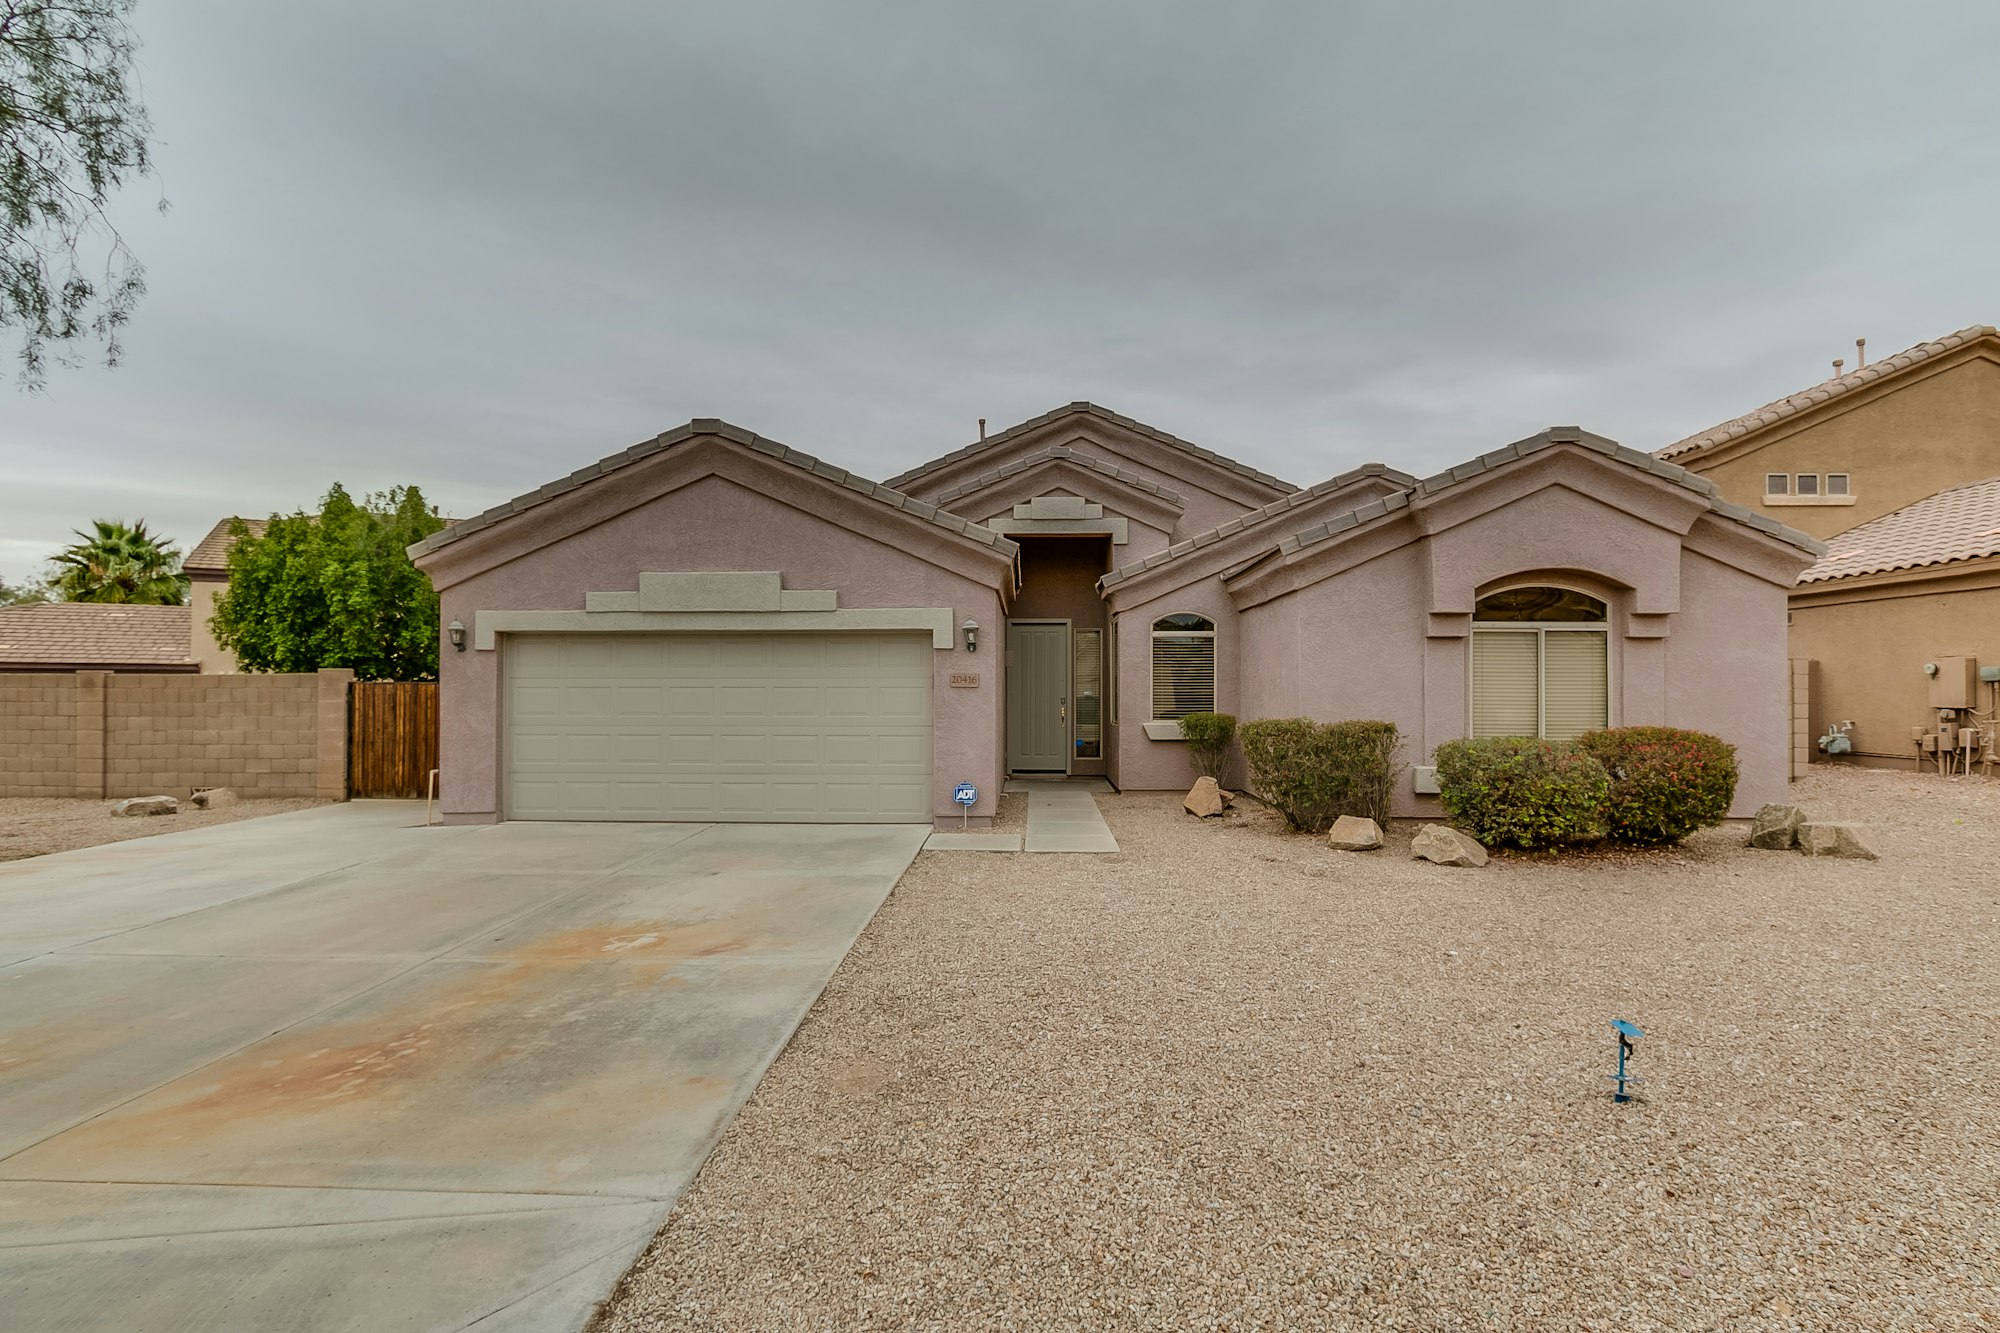 Photo 1 of 30 - 20416 N 93rd Ave, Peoria, AZ 85382